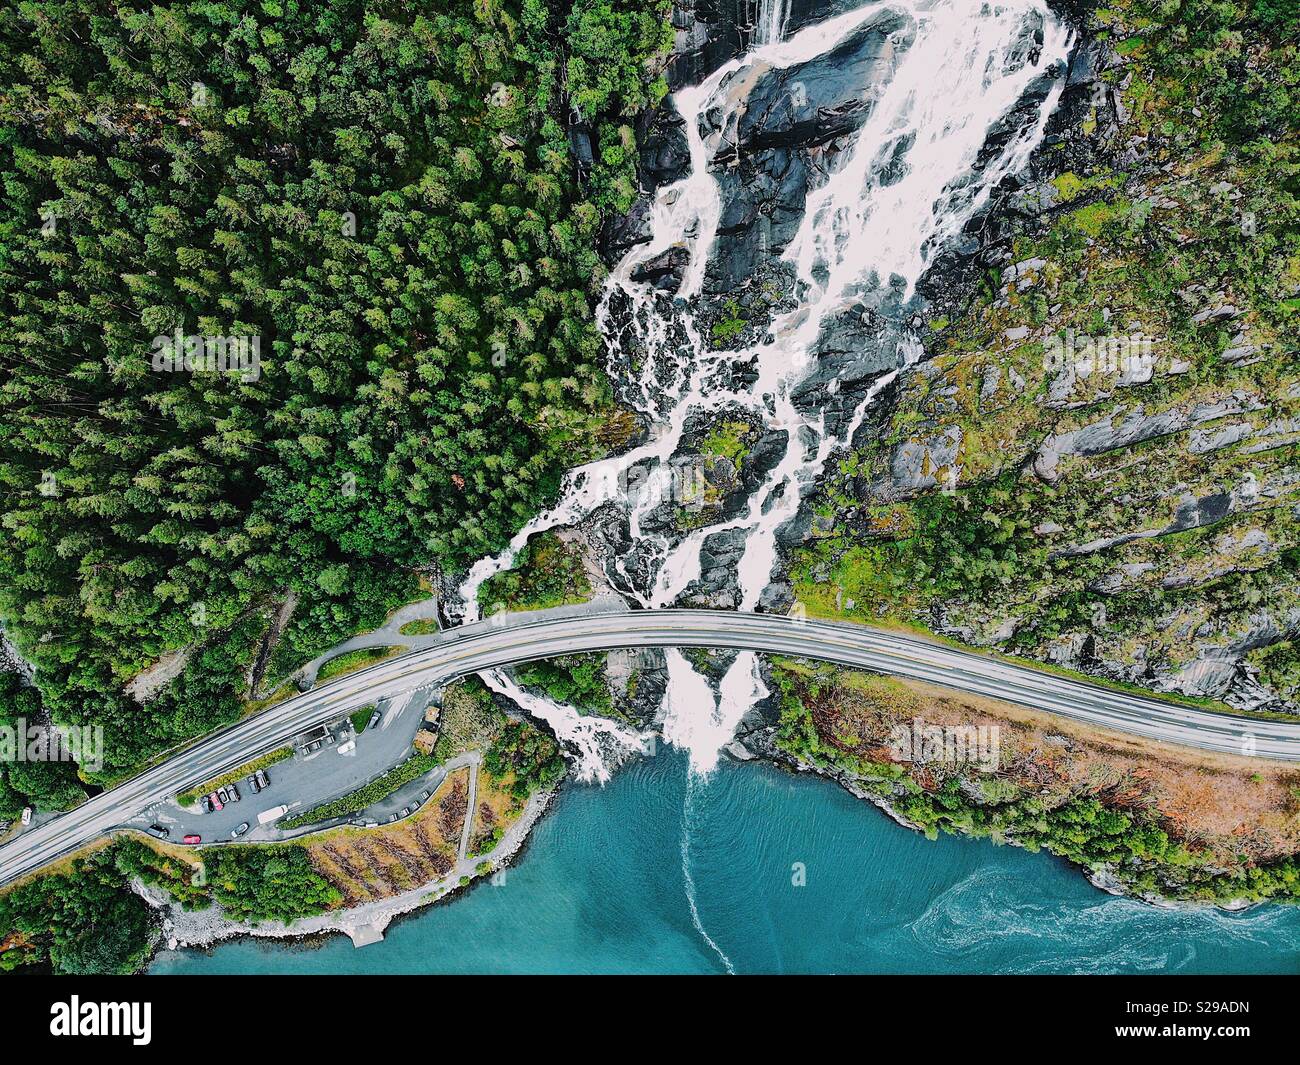 Laksforsen cascade in Grane municipality in Nordland Province in Norway  running over some 17 meter high cascades over a rocky stretch Stock Photo -  Alamy